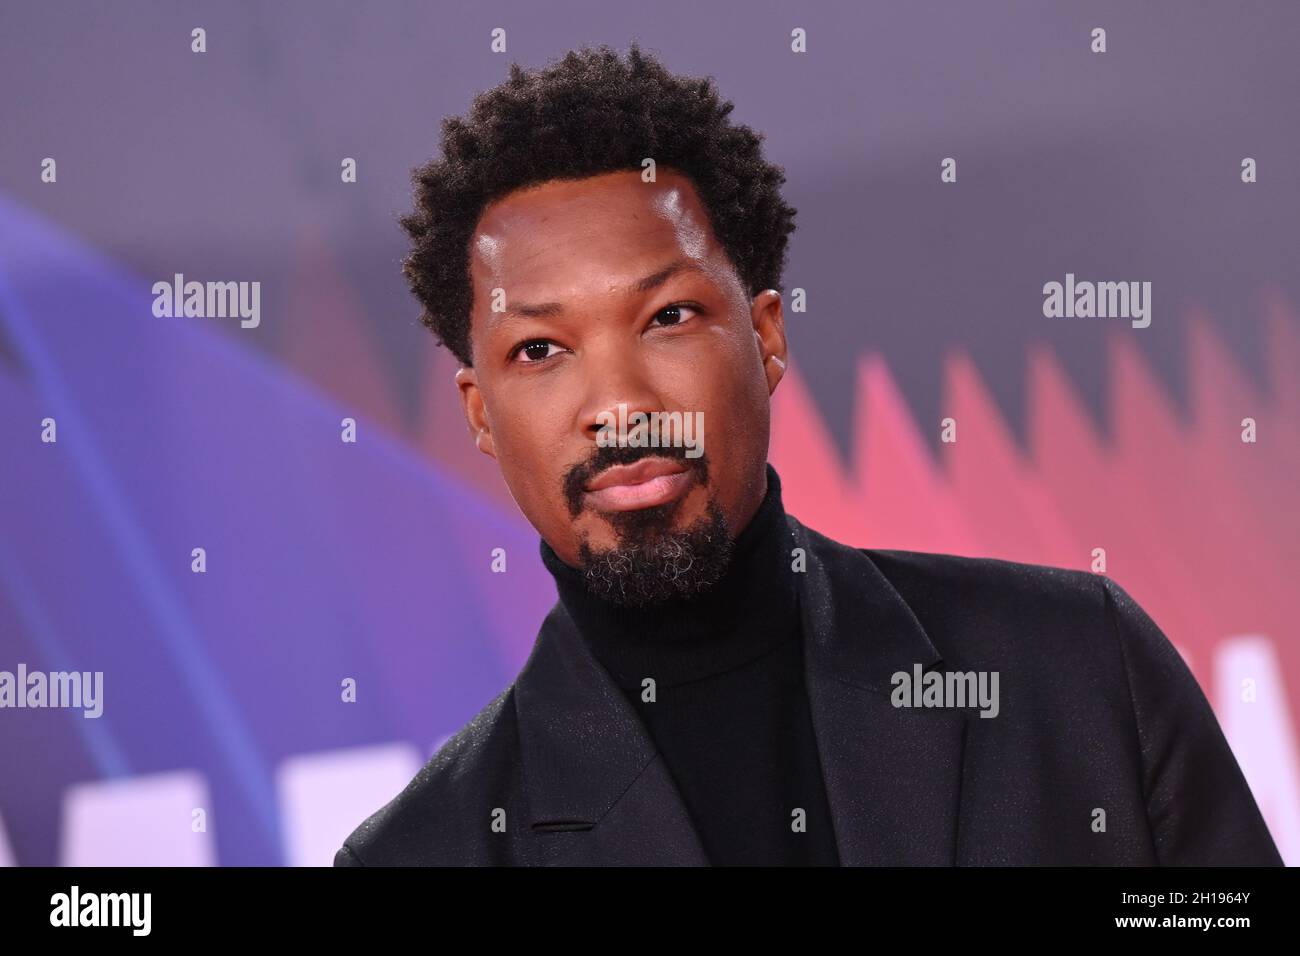 London, UK. 17 October 2021. Corey Hawkins arriving for the premiere of The Tragedy of Macbeth, at the Royal Festival Hall in London during the BFI London Film Festival. Picture date: Sunday October 17, 2021. Photo credit should read: Matt Crossick/Empics/Alamy Live News Stock Photo